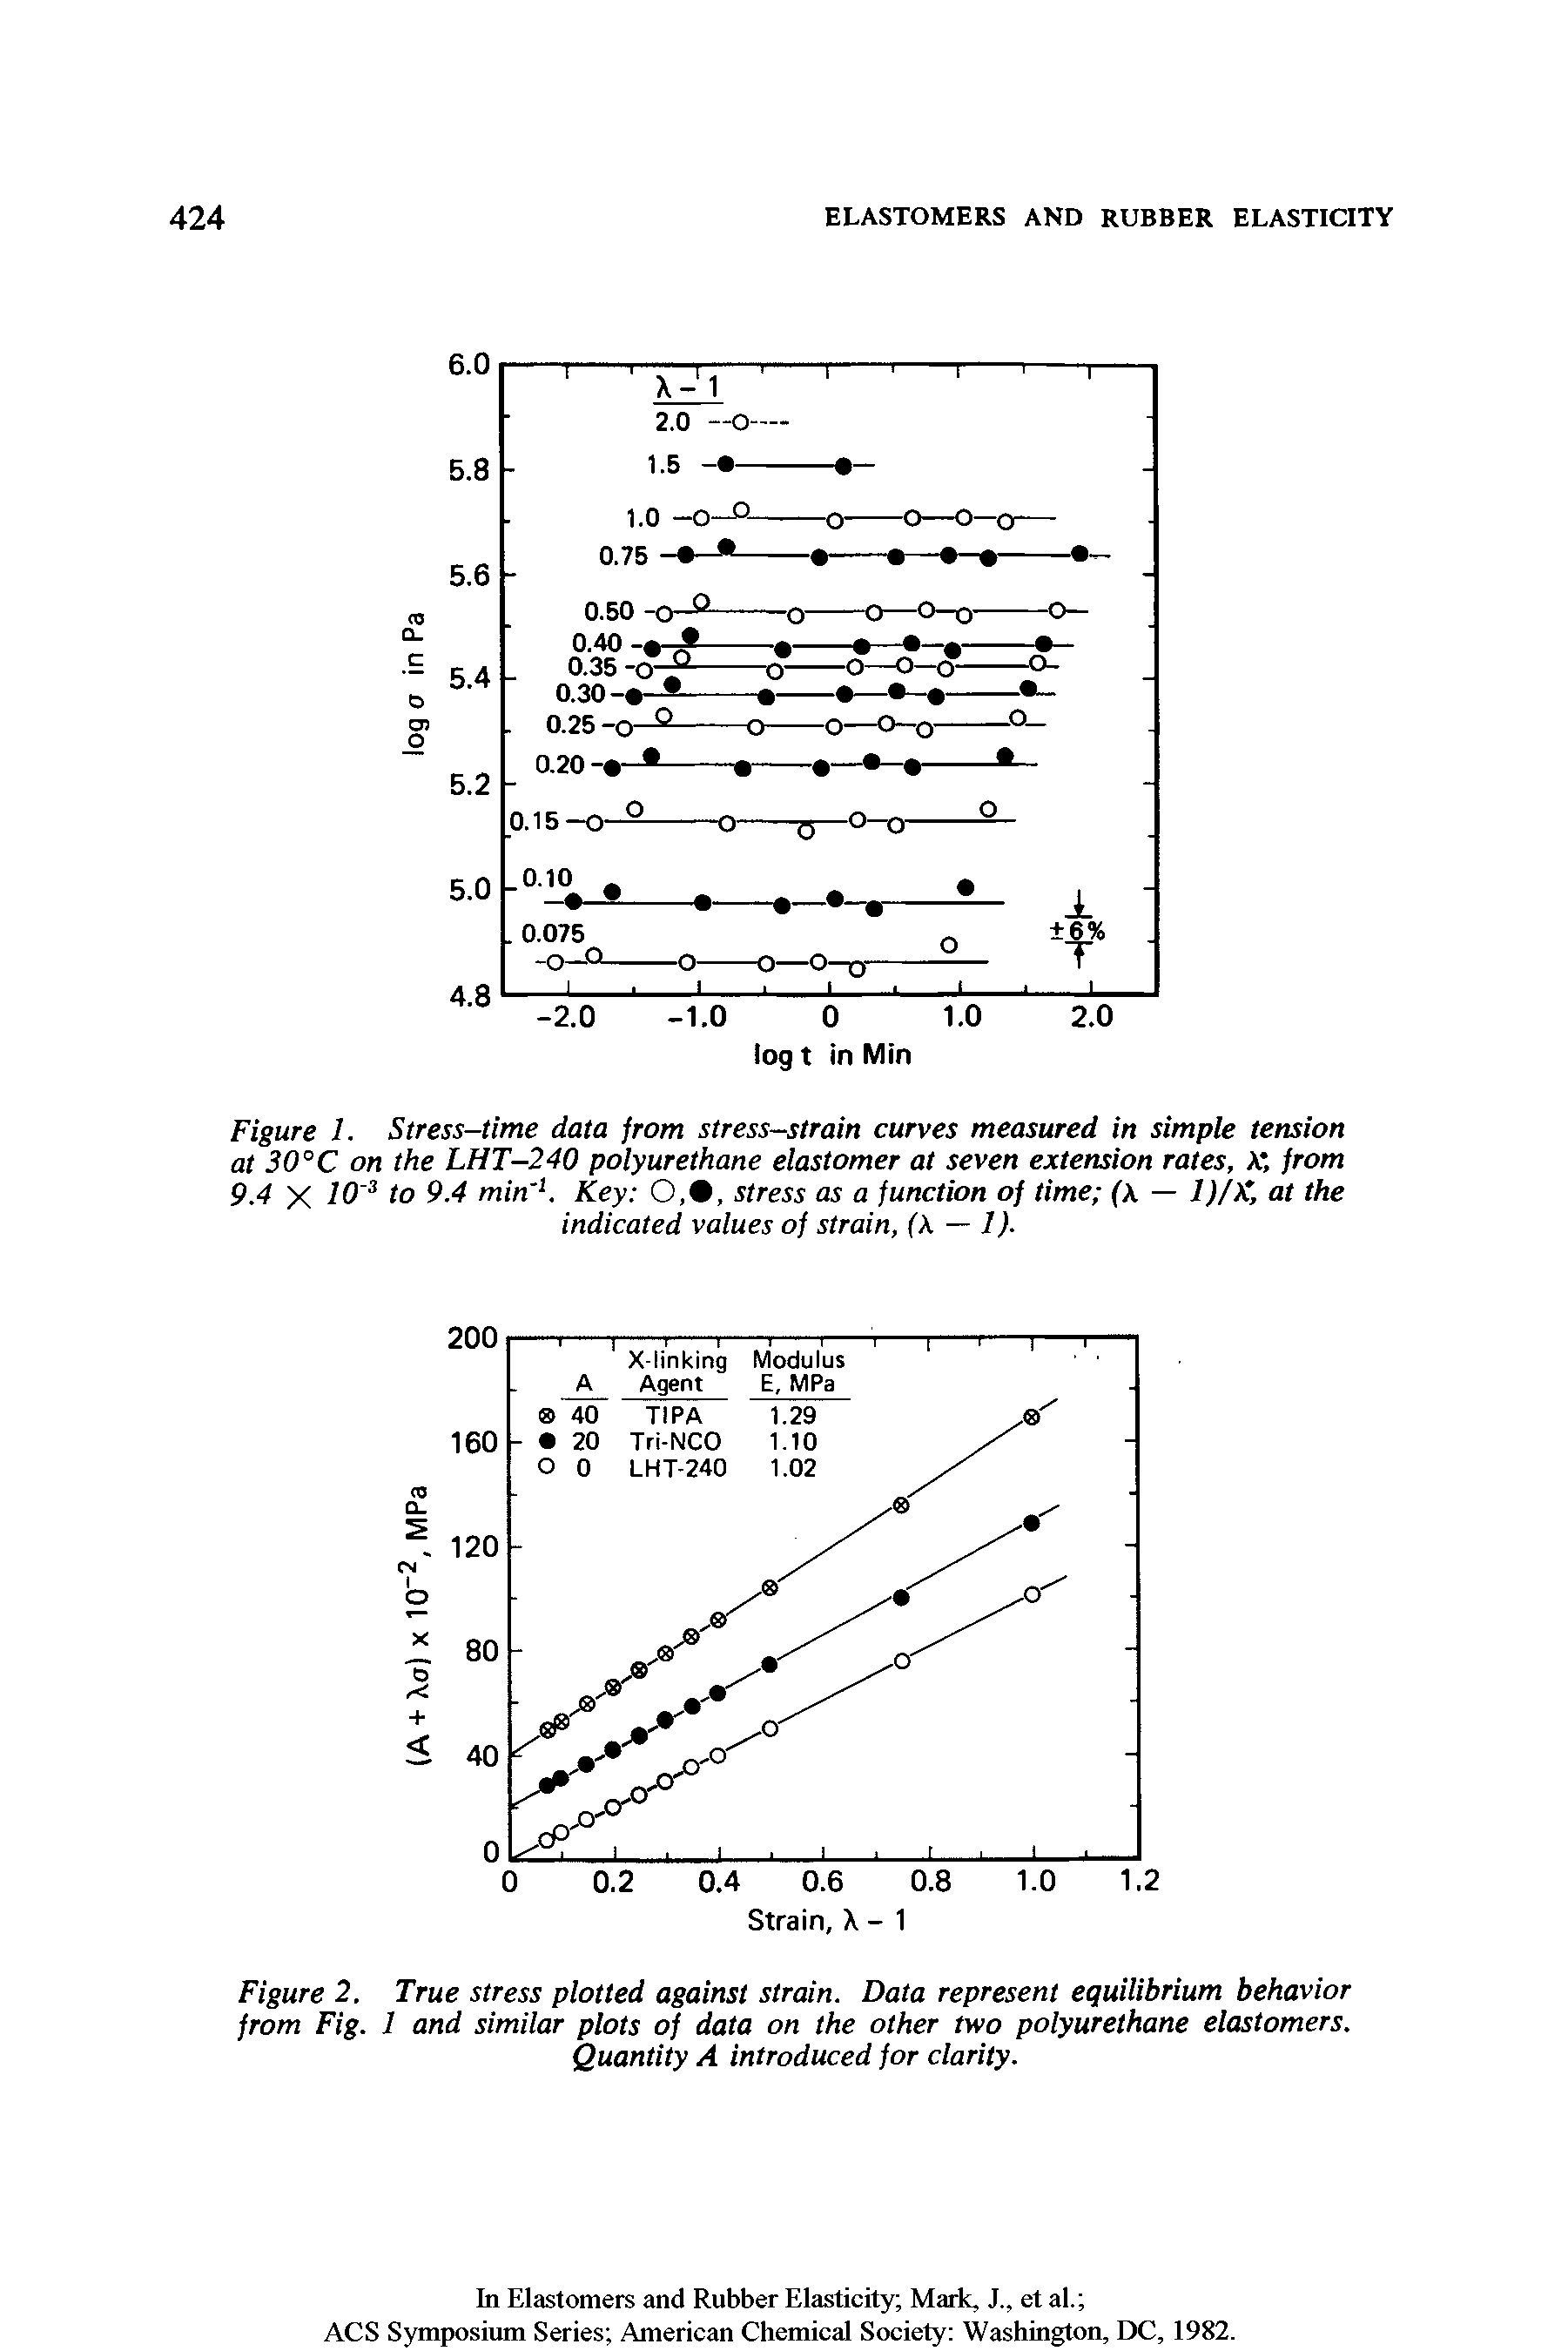 Figure 1. Stress-time data from stress-strain curves measured in simple tension at 30°C on the LHT-240 polyurethane elastomer at seven extension rates, A from 9.4 X t° 9.4 min 1. Key 0,9, stress as a function of time ( — 1)/X, at the indicated values of strain, ( — 1).